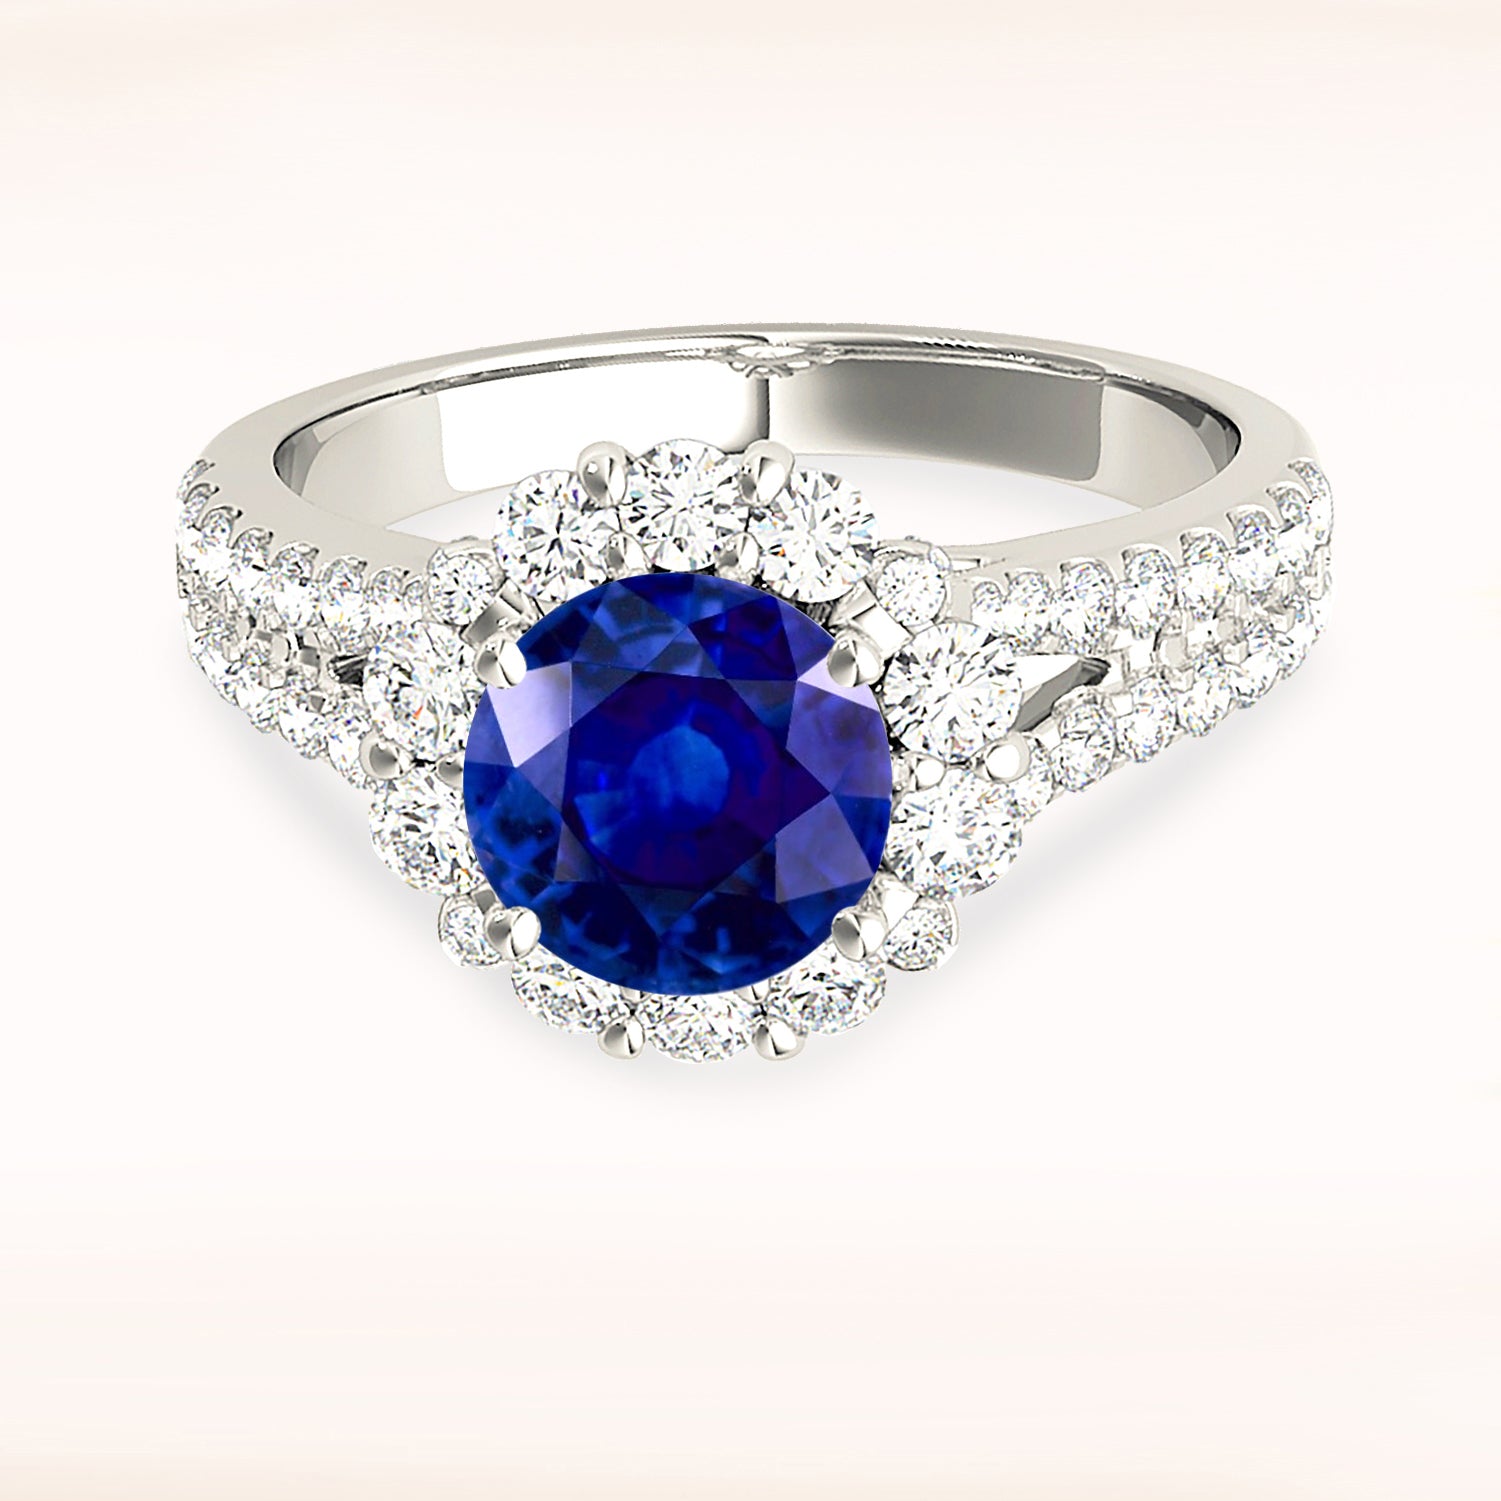 1.80 ct. Genuine Blue Sapphire Split Shank Halo Ring with 0.90 ctw. Side Diamonds-in 14K/18K White, Yellow, Rose Gold and Platinum - Christmas Jewelry Gift -VIRABYANI